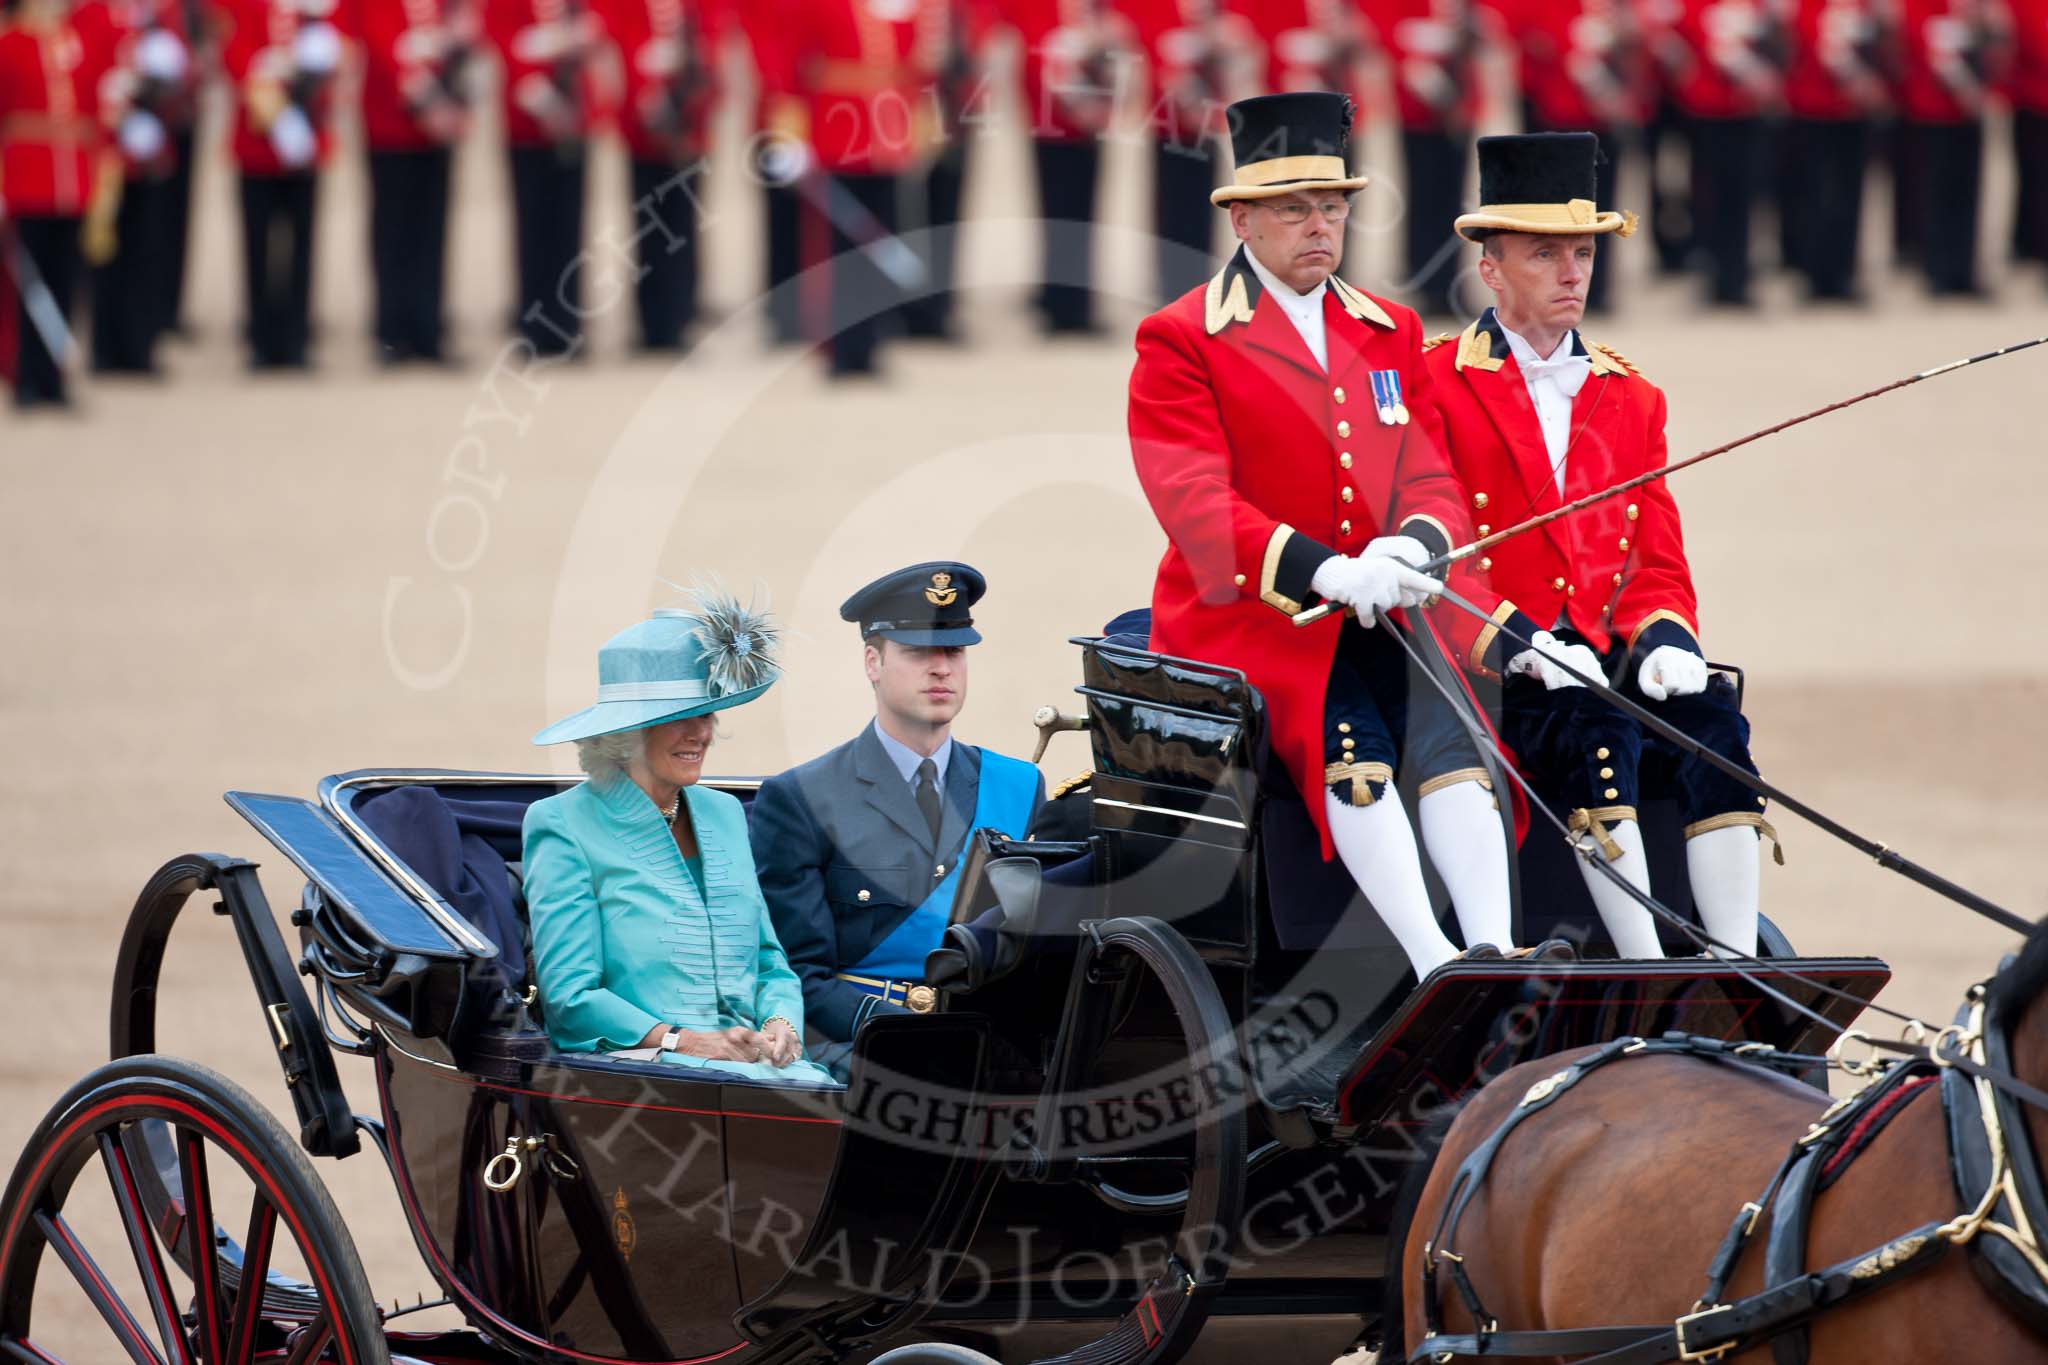 Trooping the Colour 2009: In the first of the two barouche carriages HRH the Duchess of Cornwall, next to her HRH Prince William, and opposite and out of sight HRH Prince Harry..
Horse Guards Parade, Westminster,
London SW1,

United Kingdom,
on 13 June 2009 at 10:48, image #93